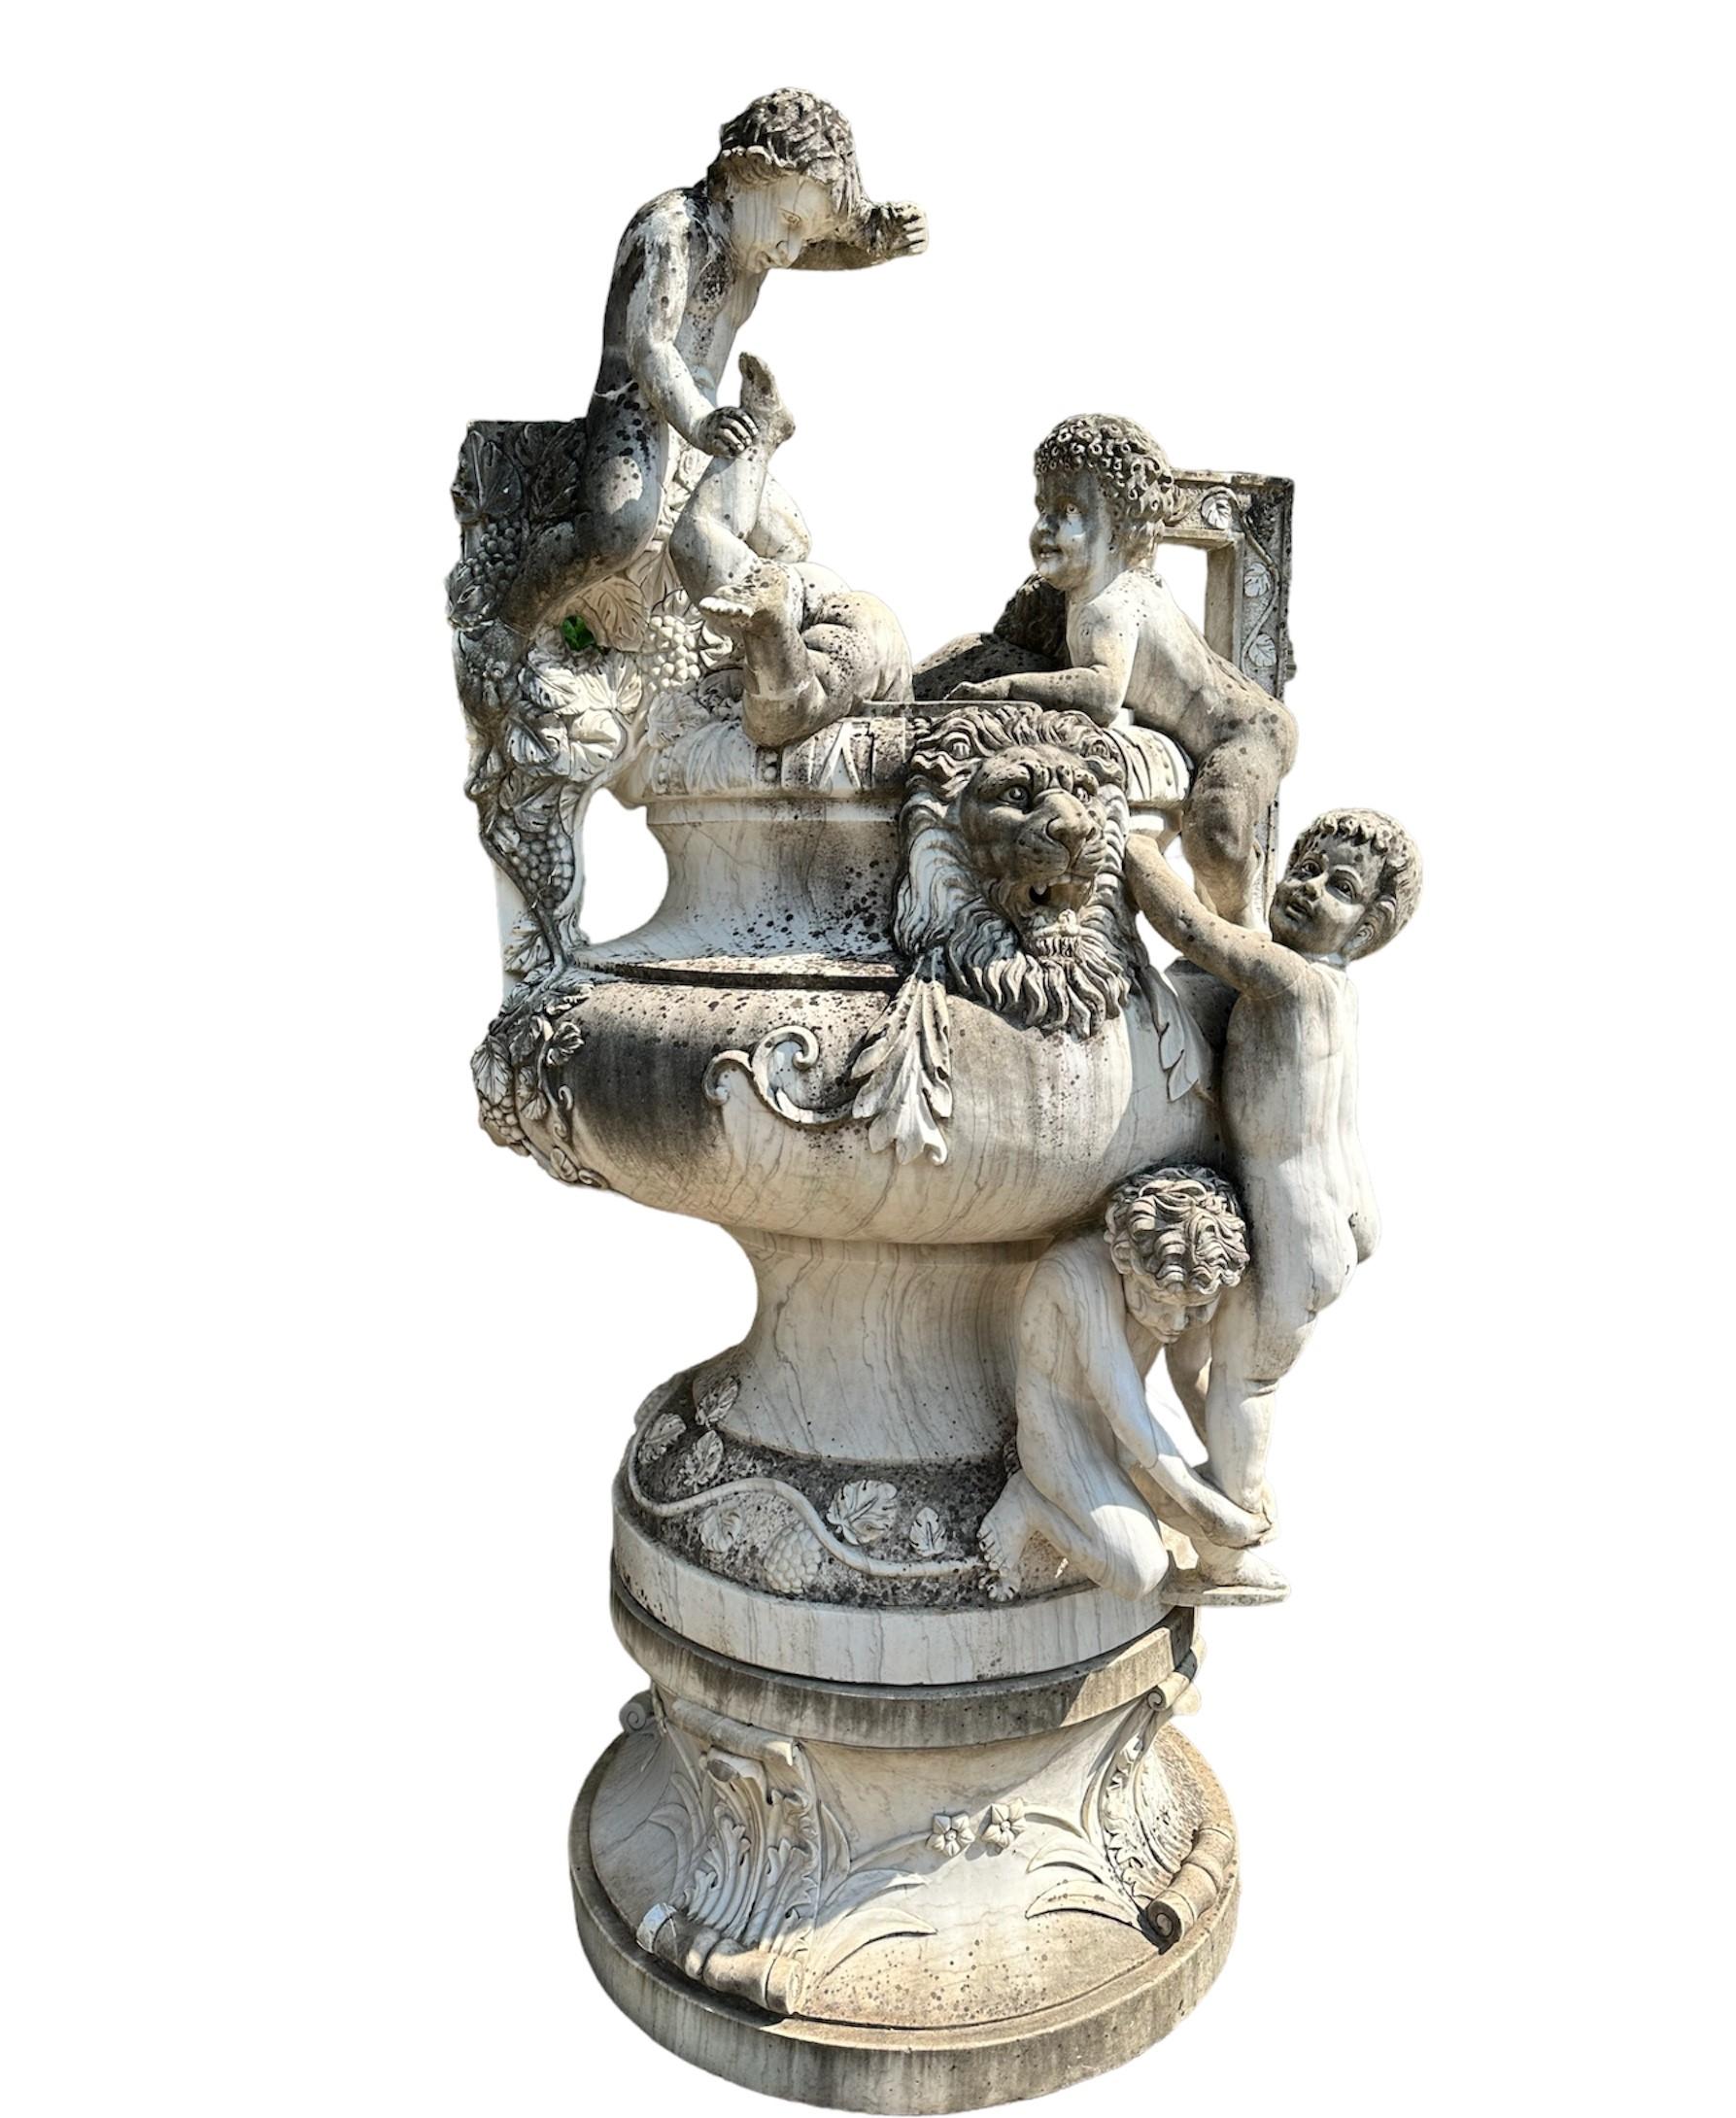 Large sculptural group made of white marble.
Inspired by the famous work by Joseph Reynés I Gurgui (Fuente de Los Ninos), the group depicts a large vase adorned with bunches of grapes with cherubs climbing up the sides until they almost 